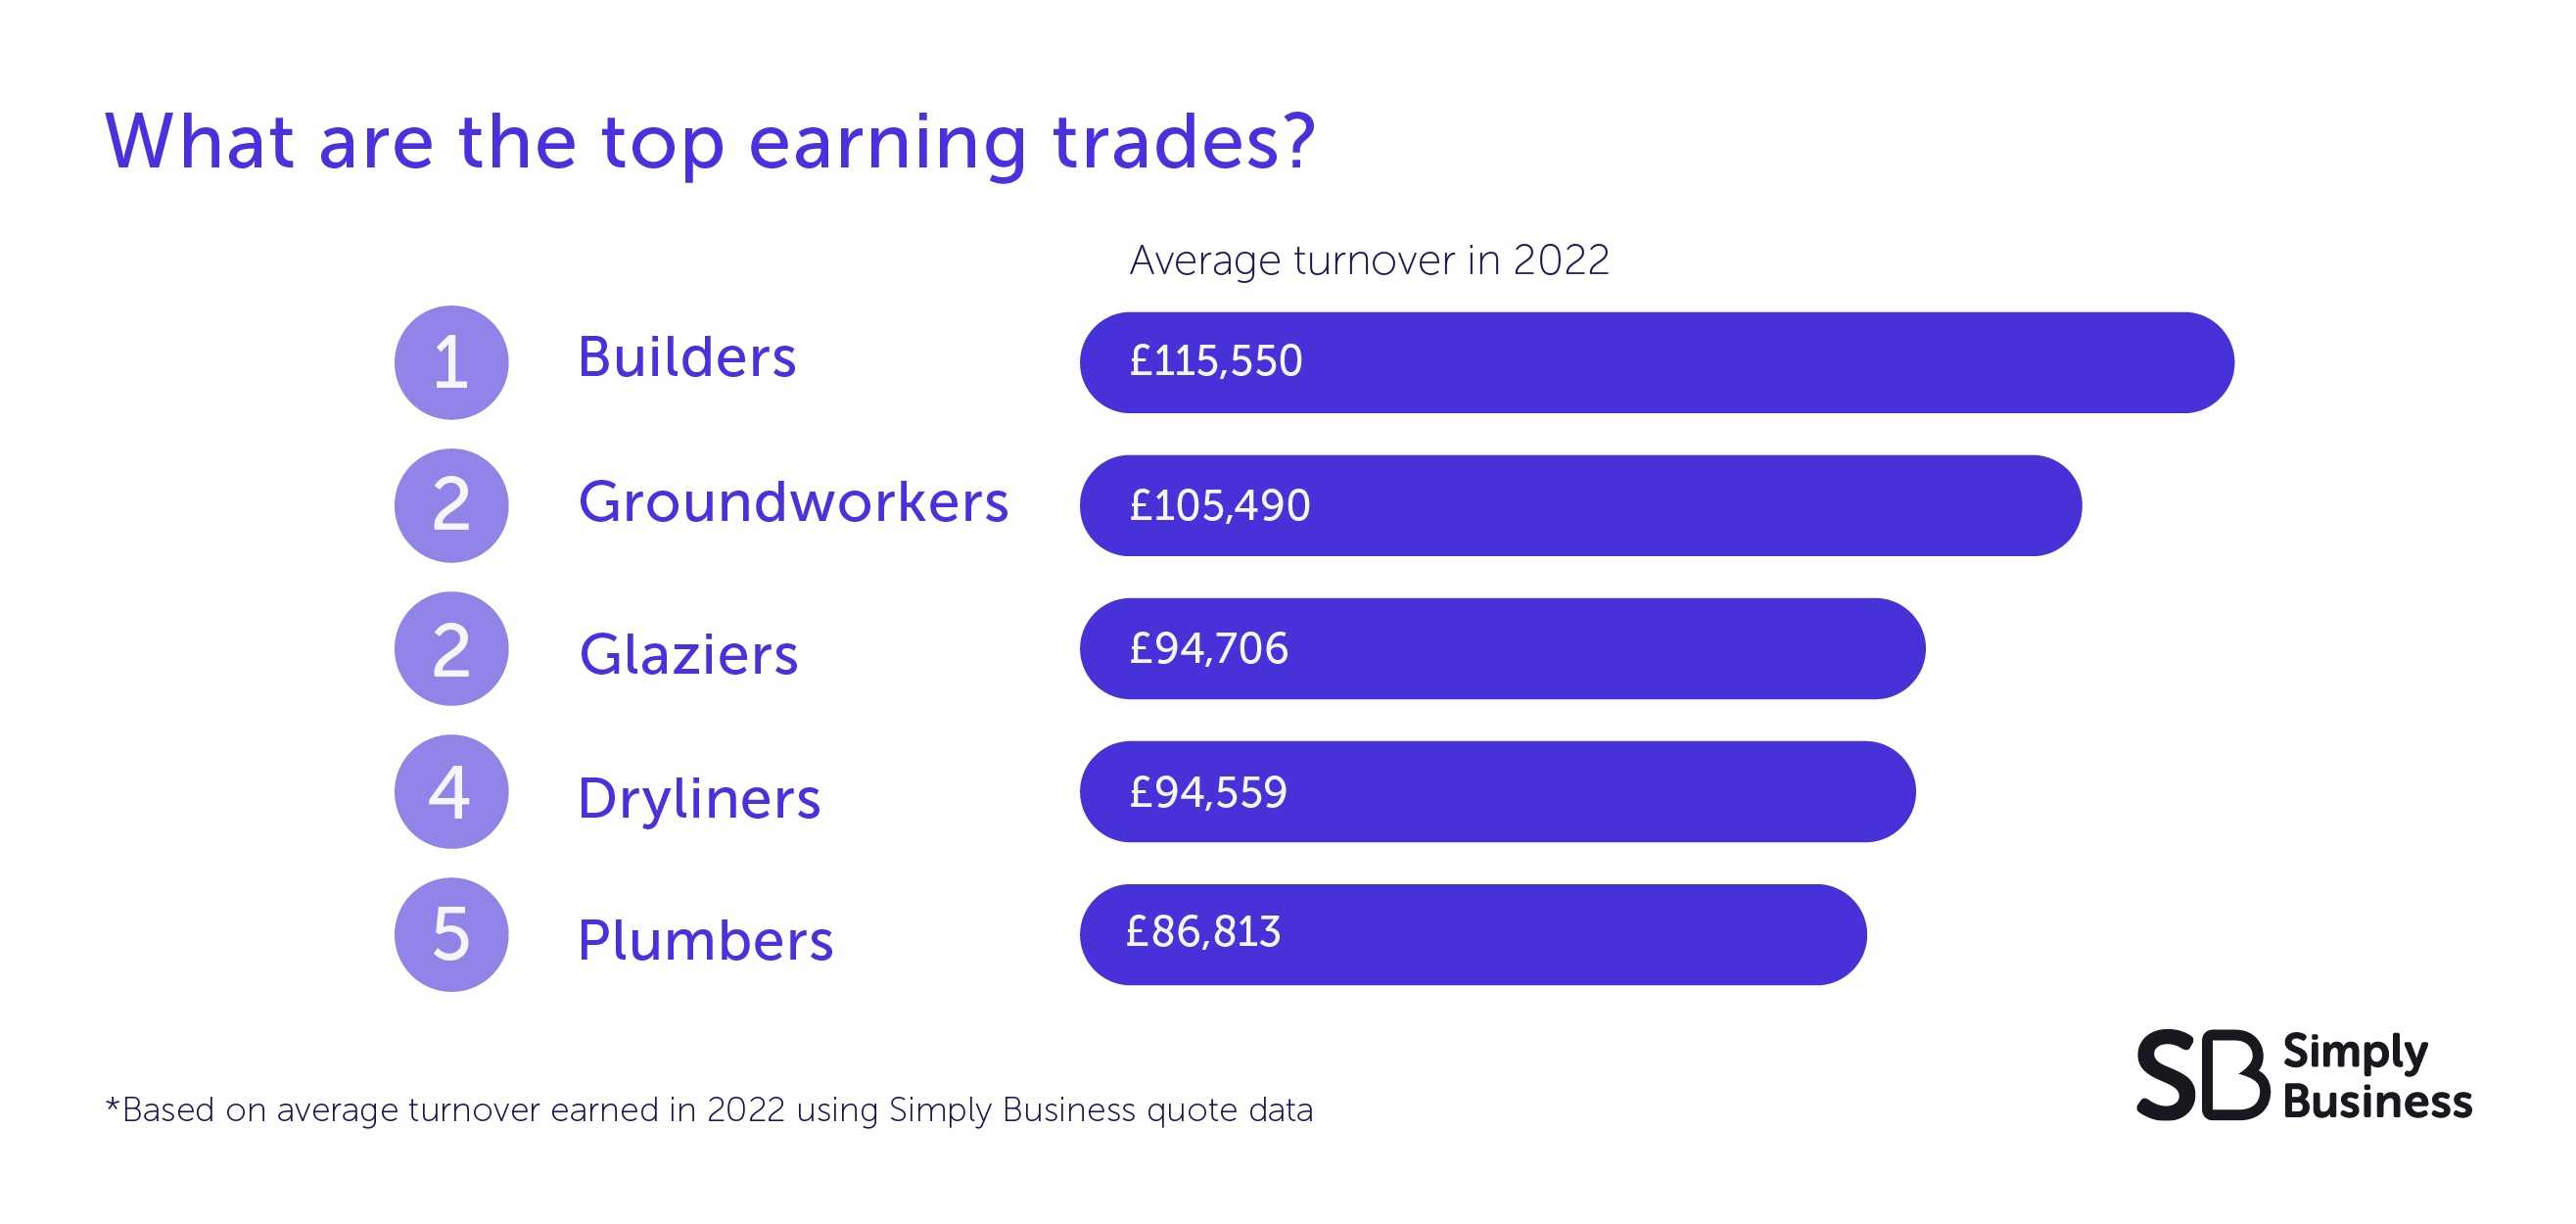 The top earning trades by turnover in 2022